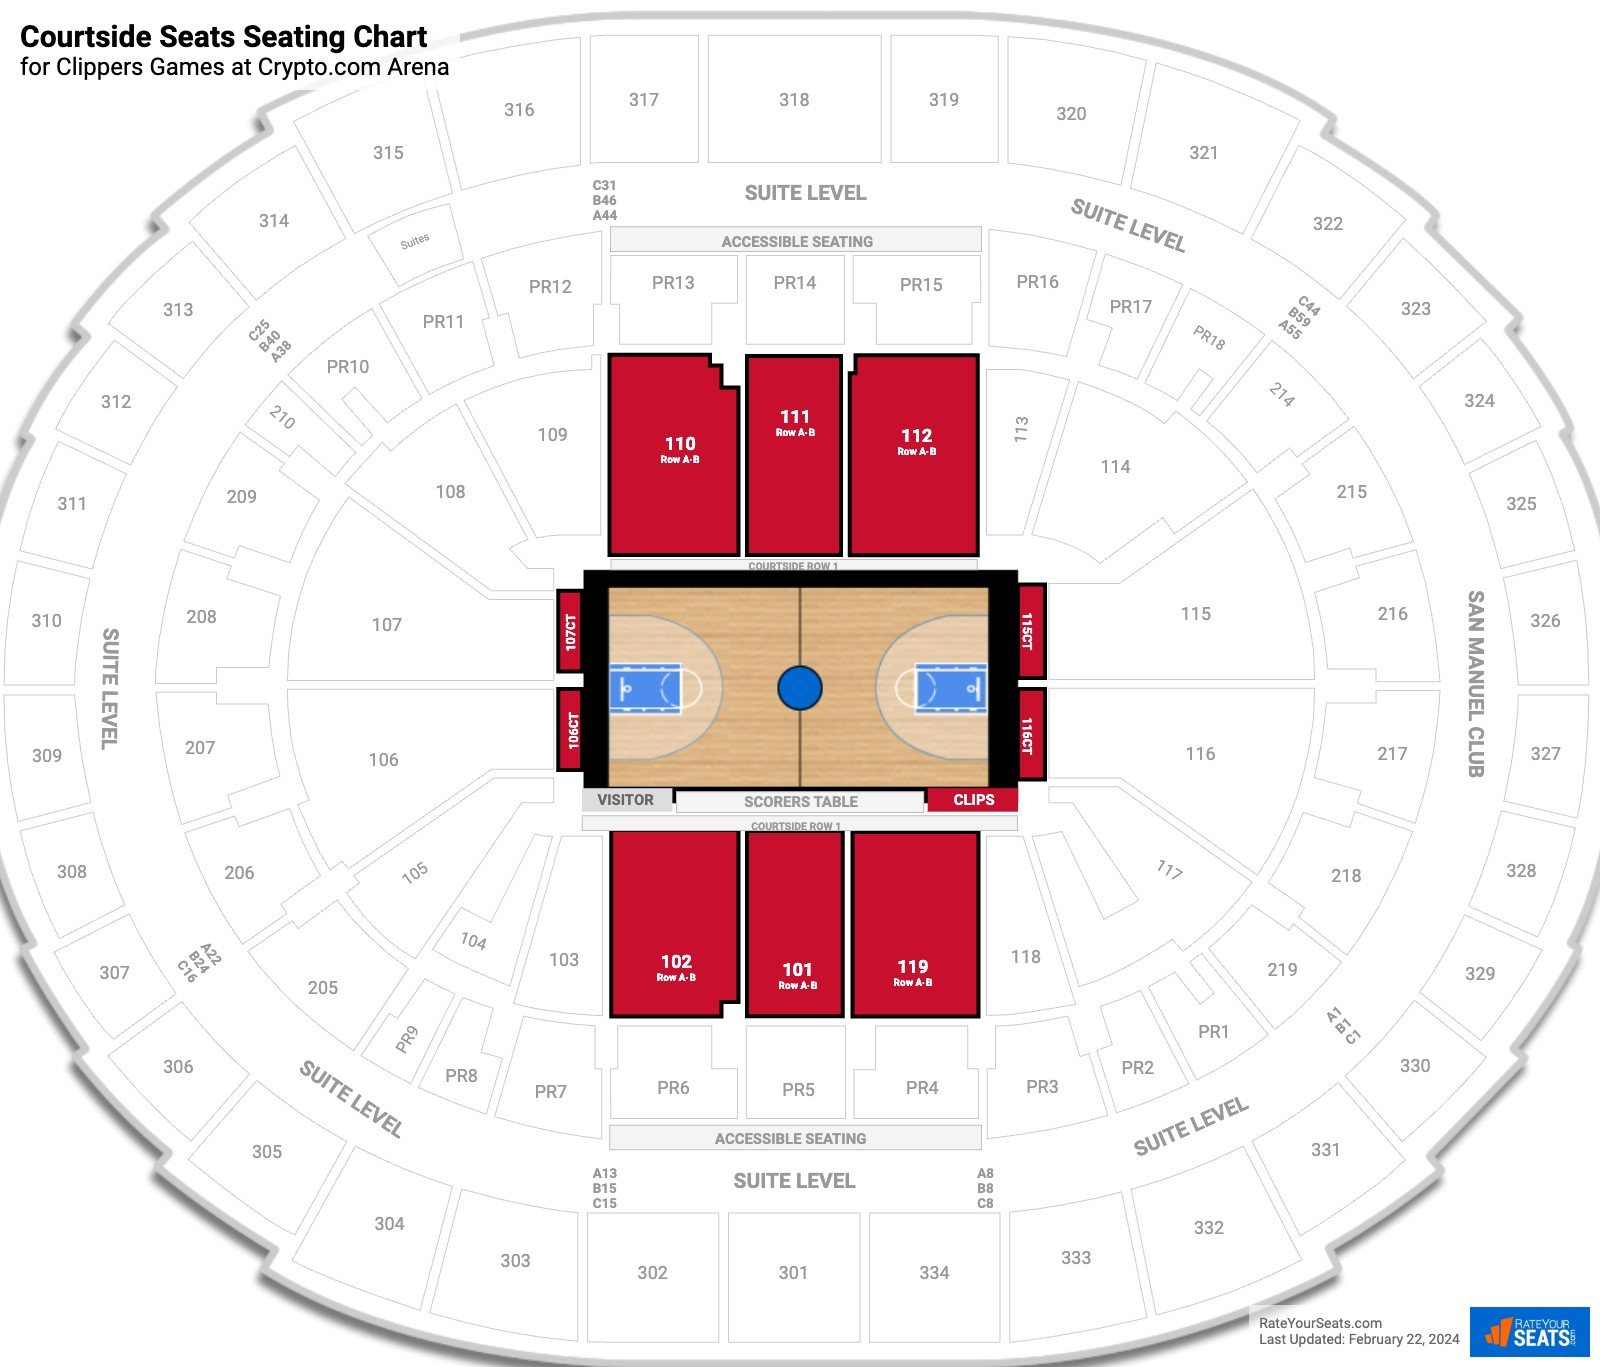 Staples Center Seating Guide Los Angeles Lakers Clippers Radiozona Com Ar